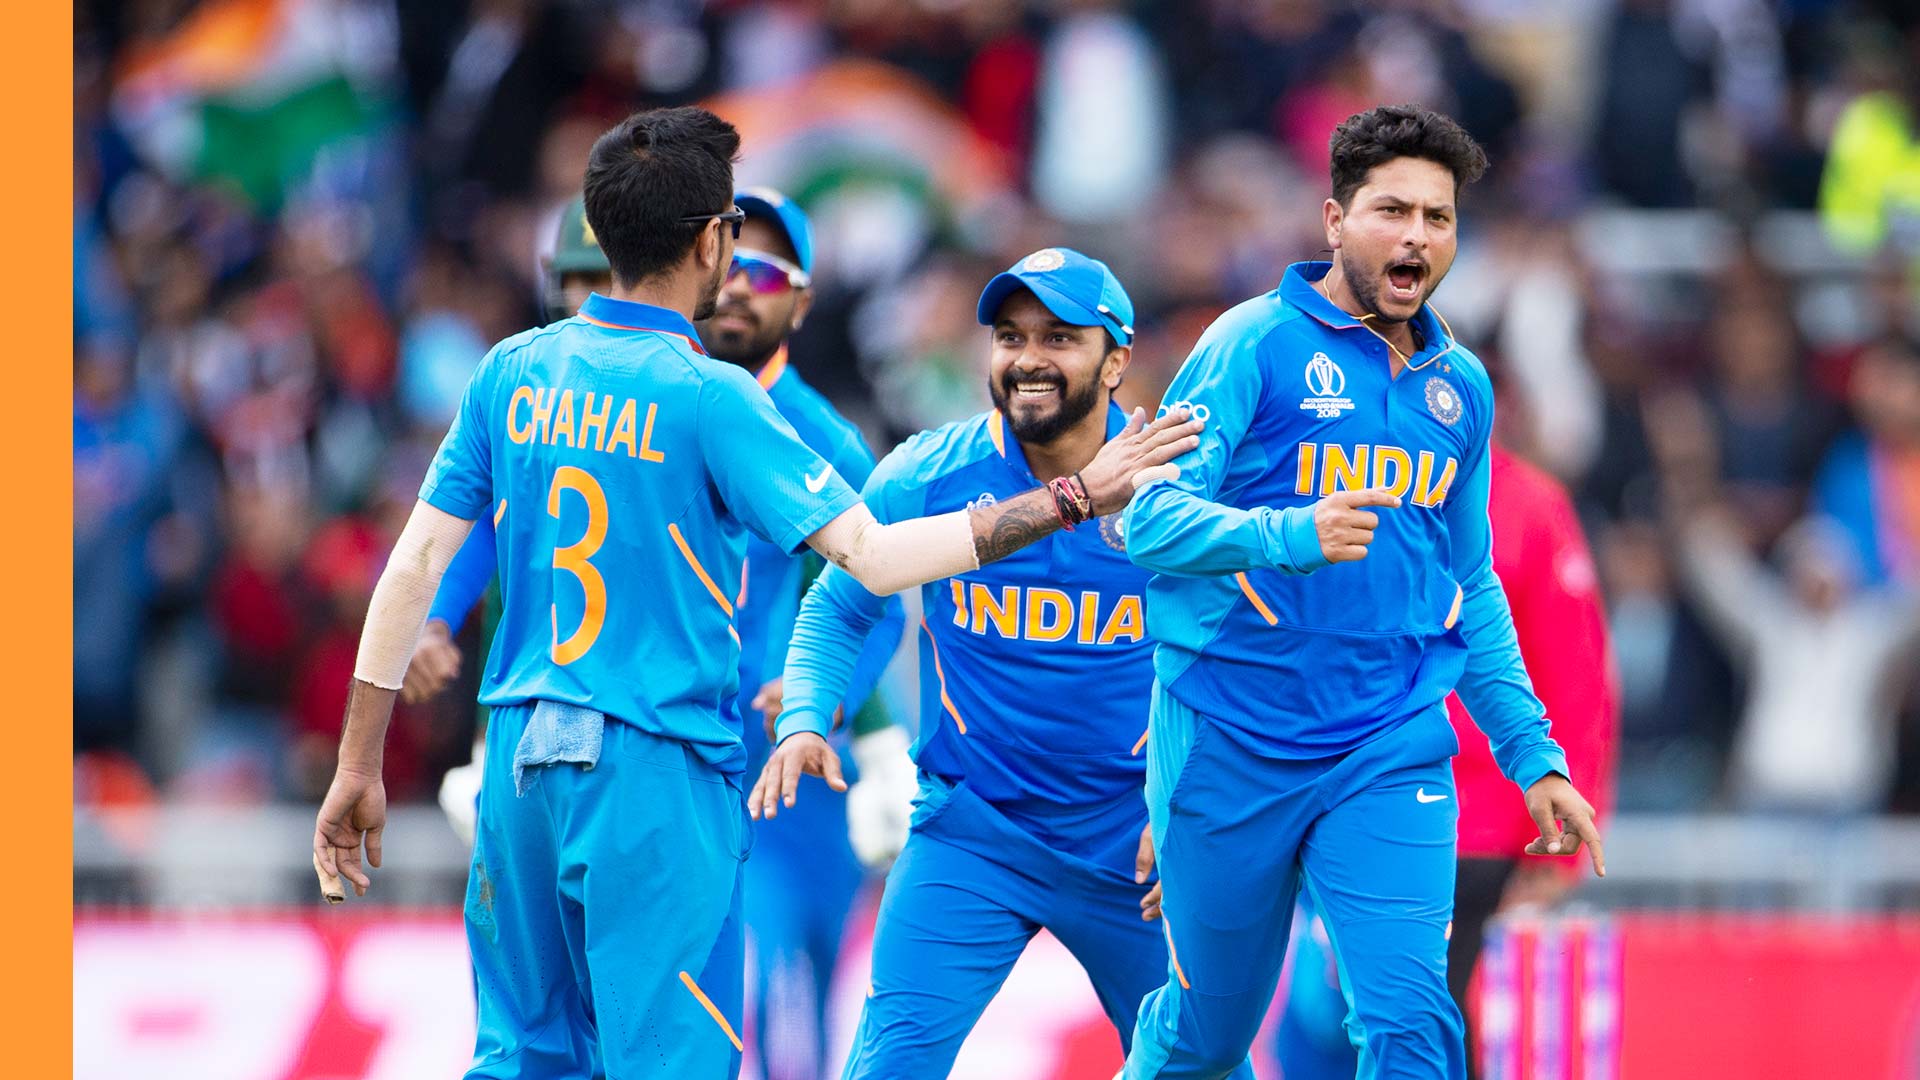 India vs Afghanistan Cricket Match World Cup 2019 Live Score